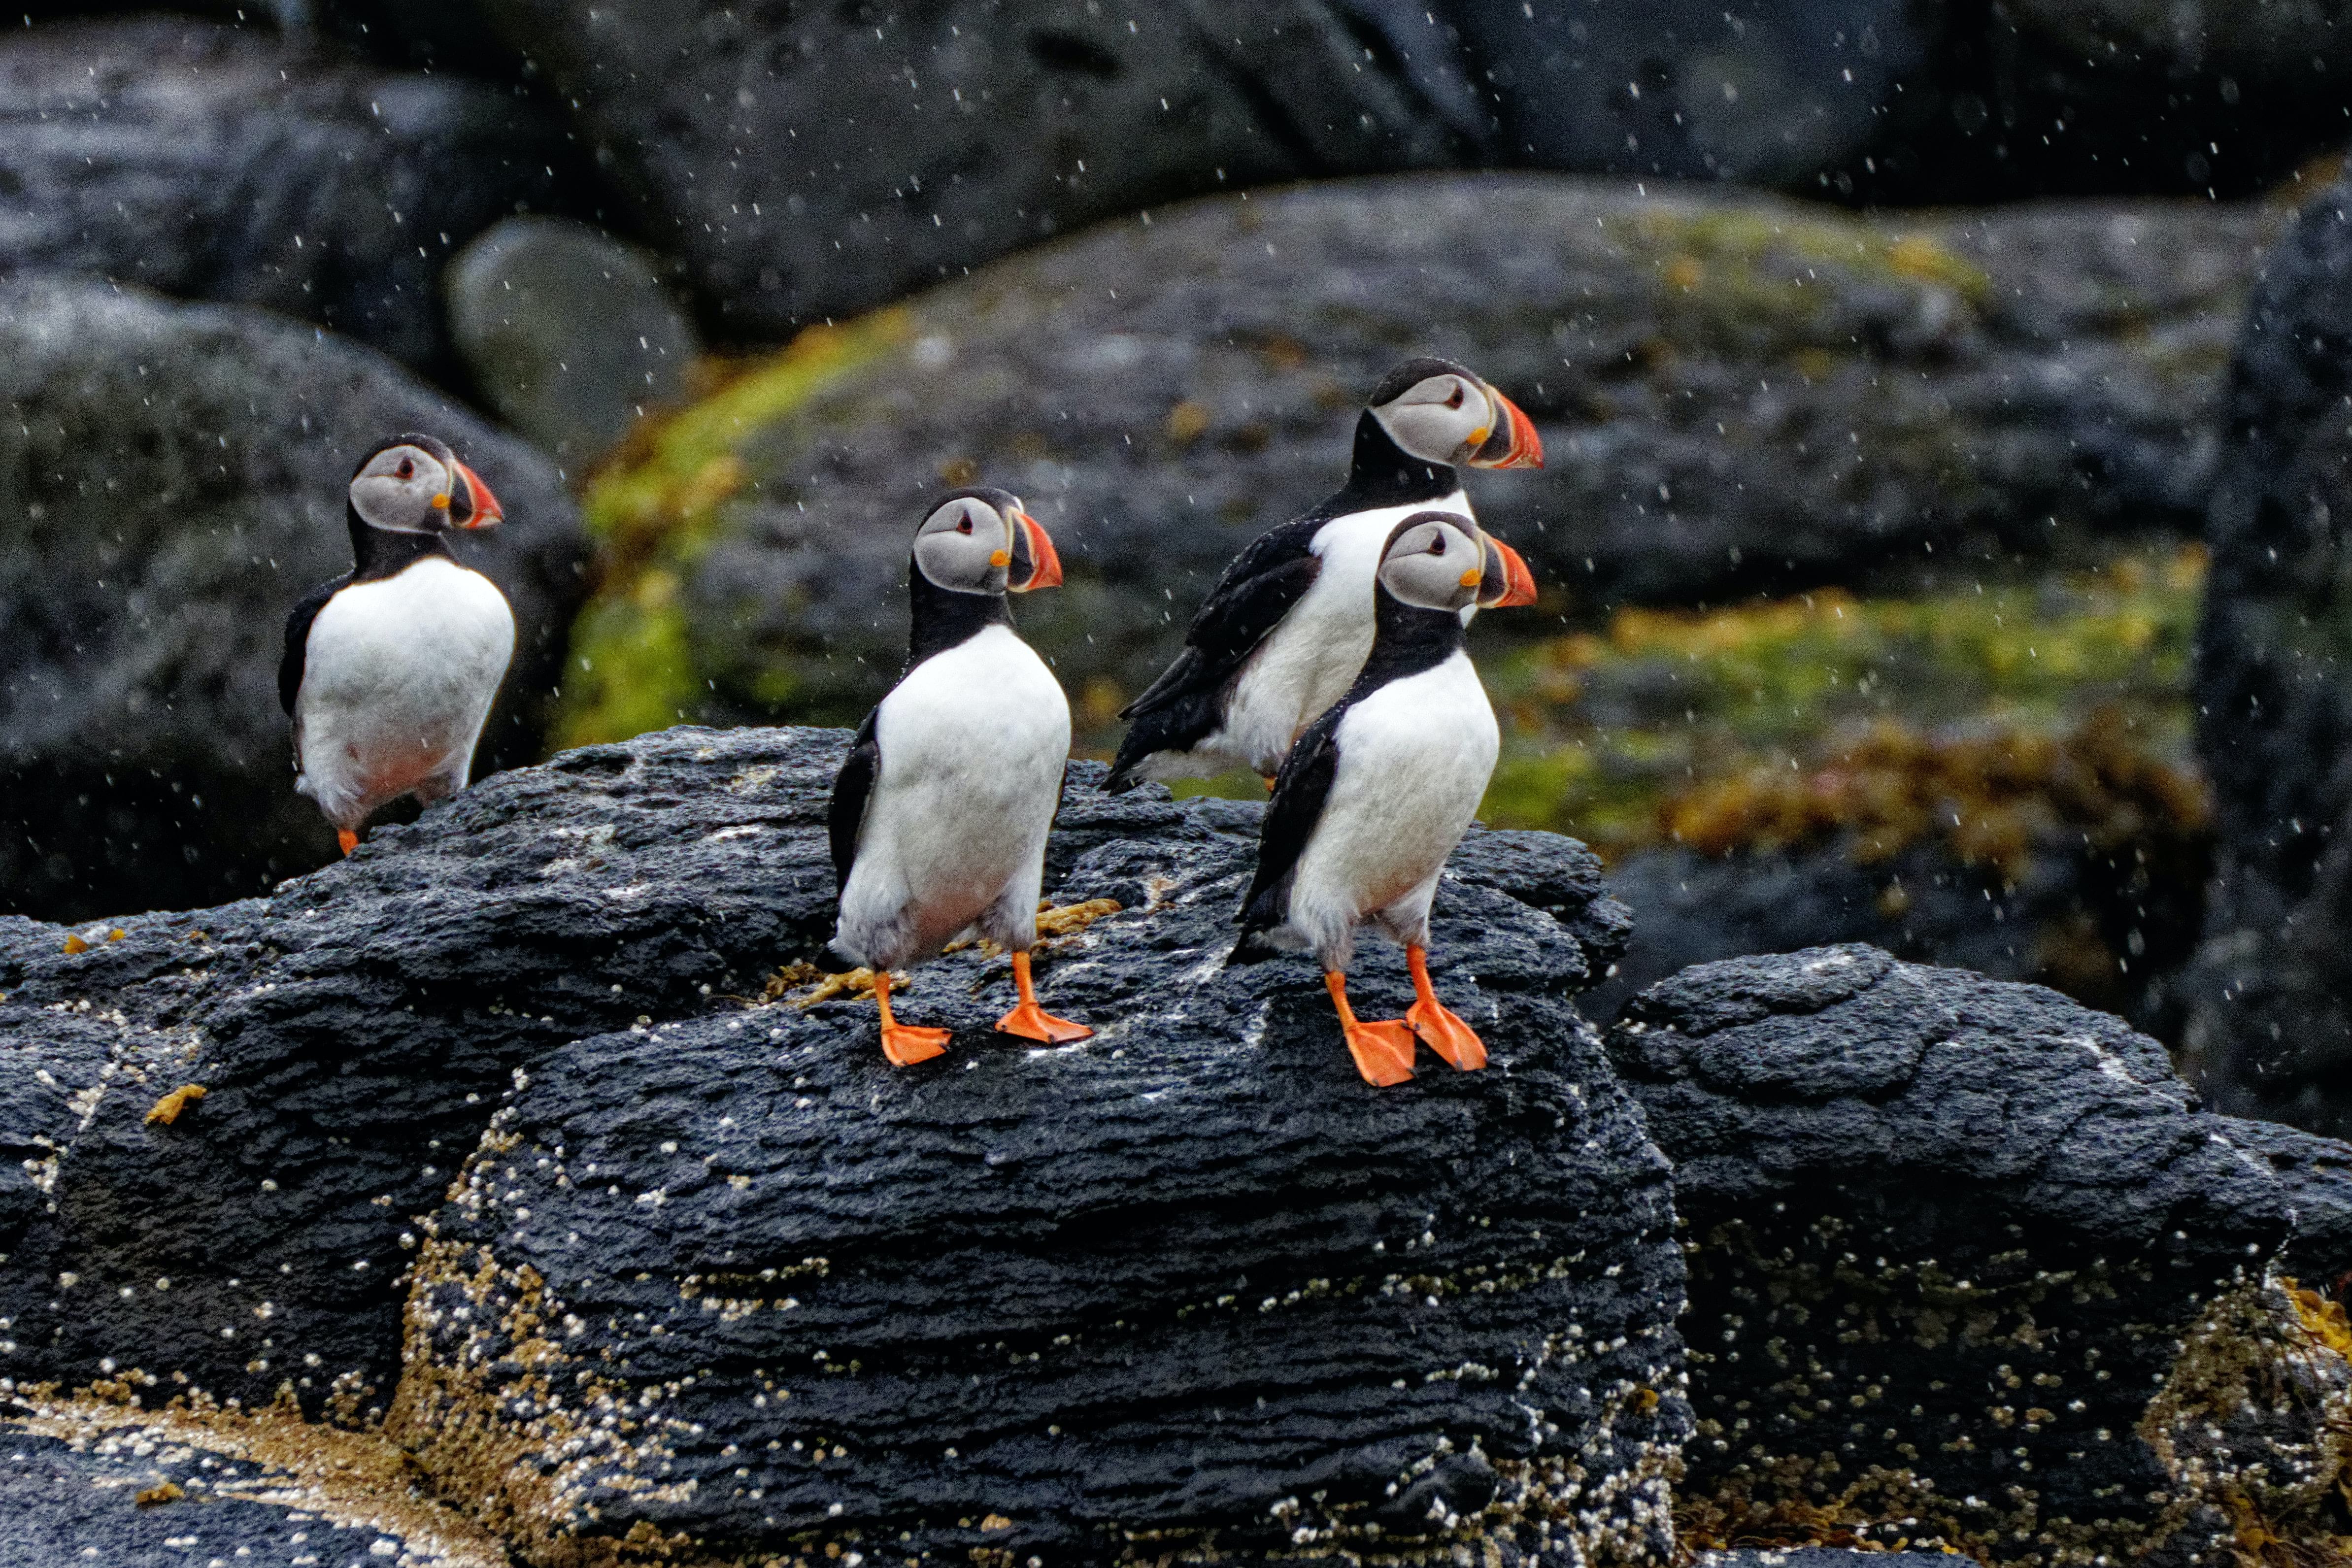 Puffin on rocky shore in Iceland